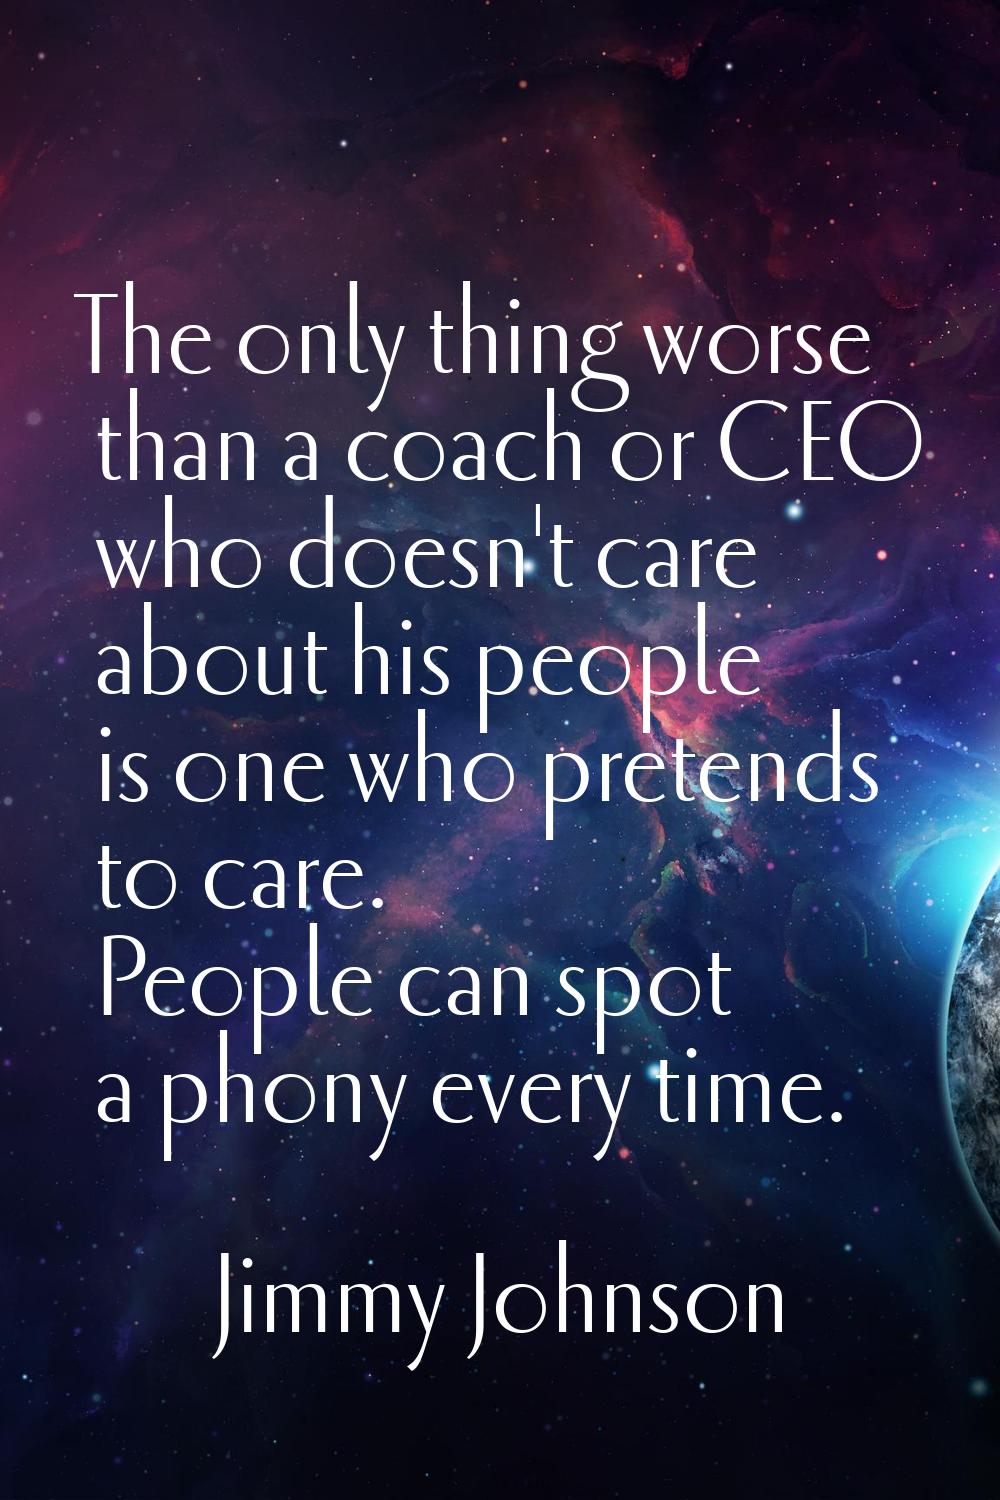 The only thing worse than a coach or CEO who doesn't care about his people is one who pretends to c